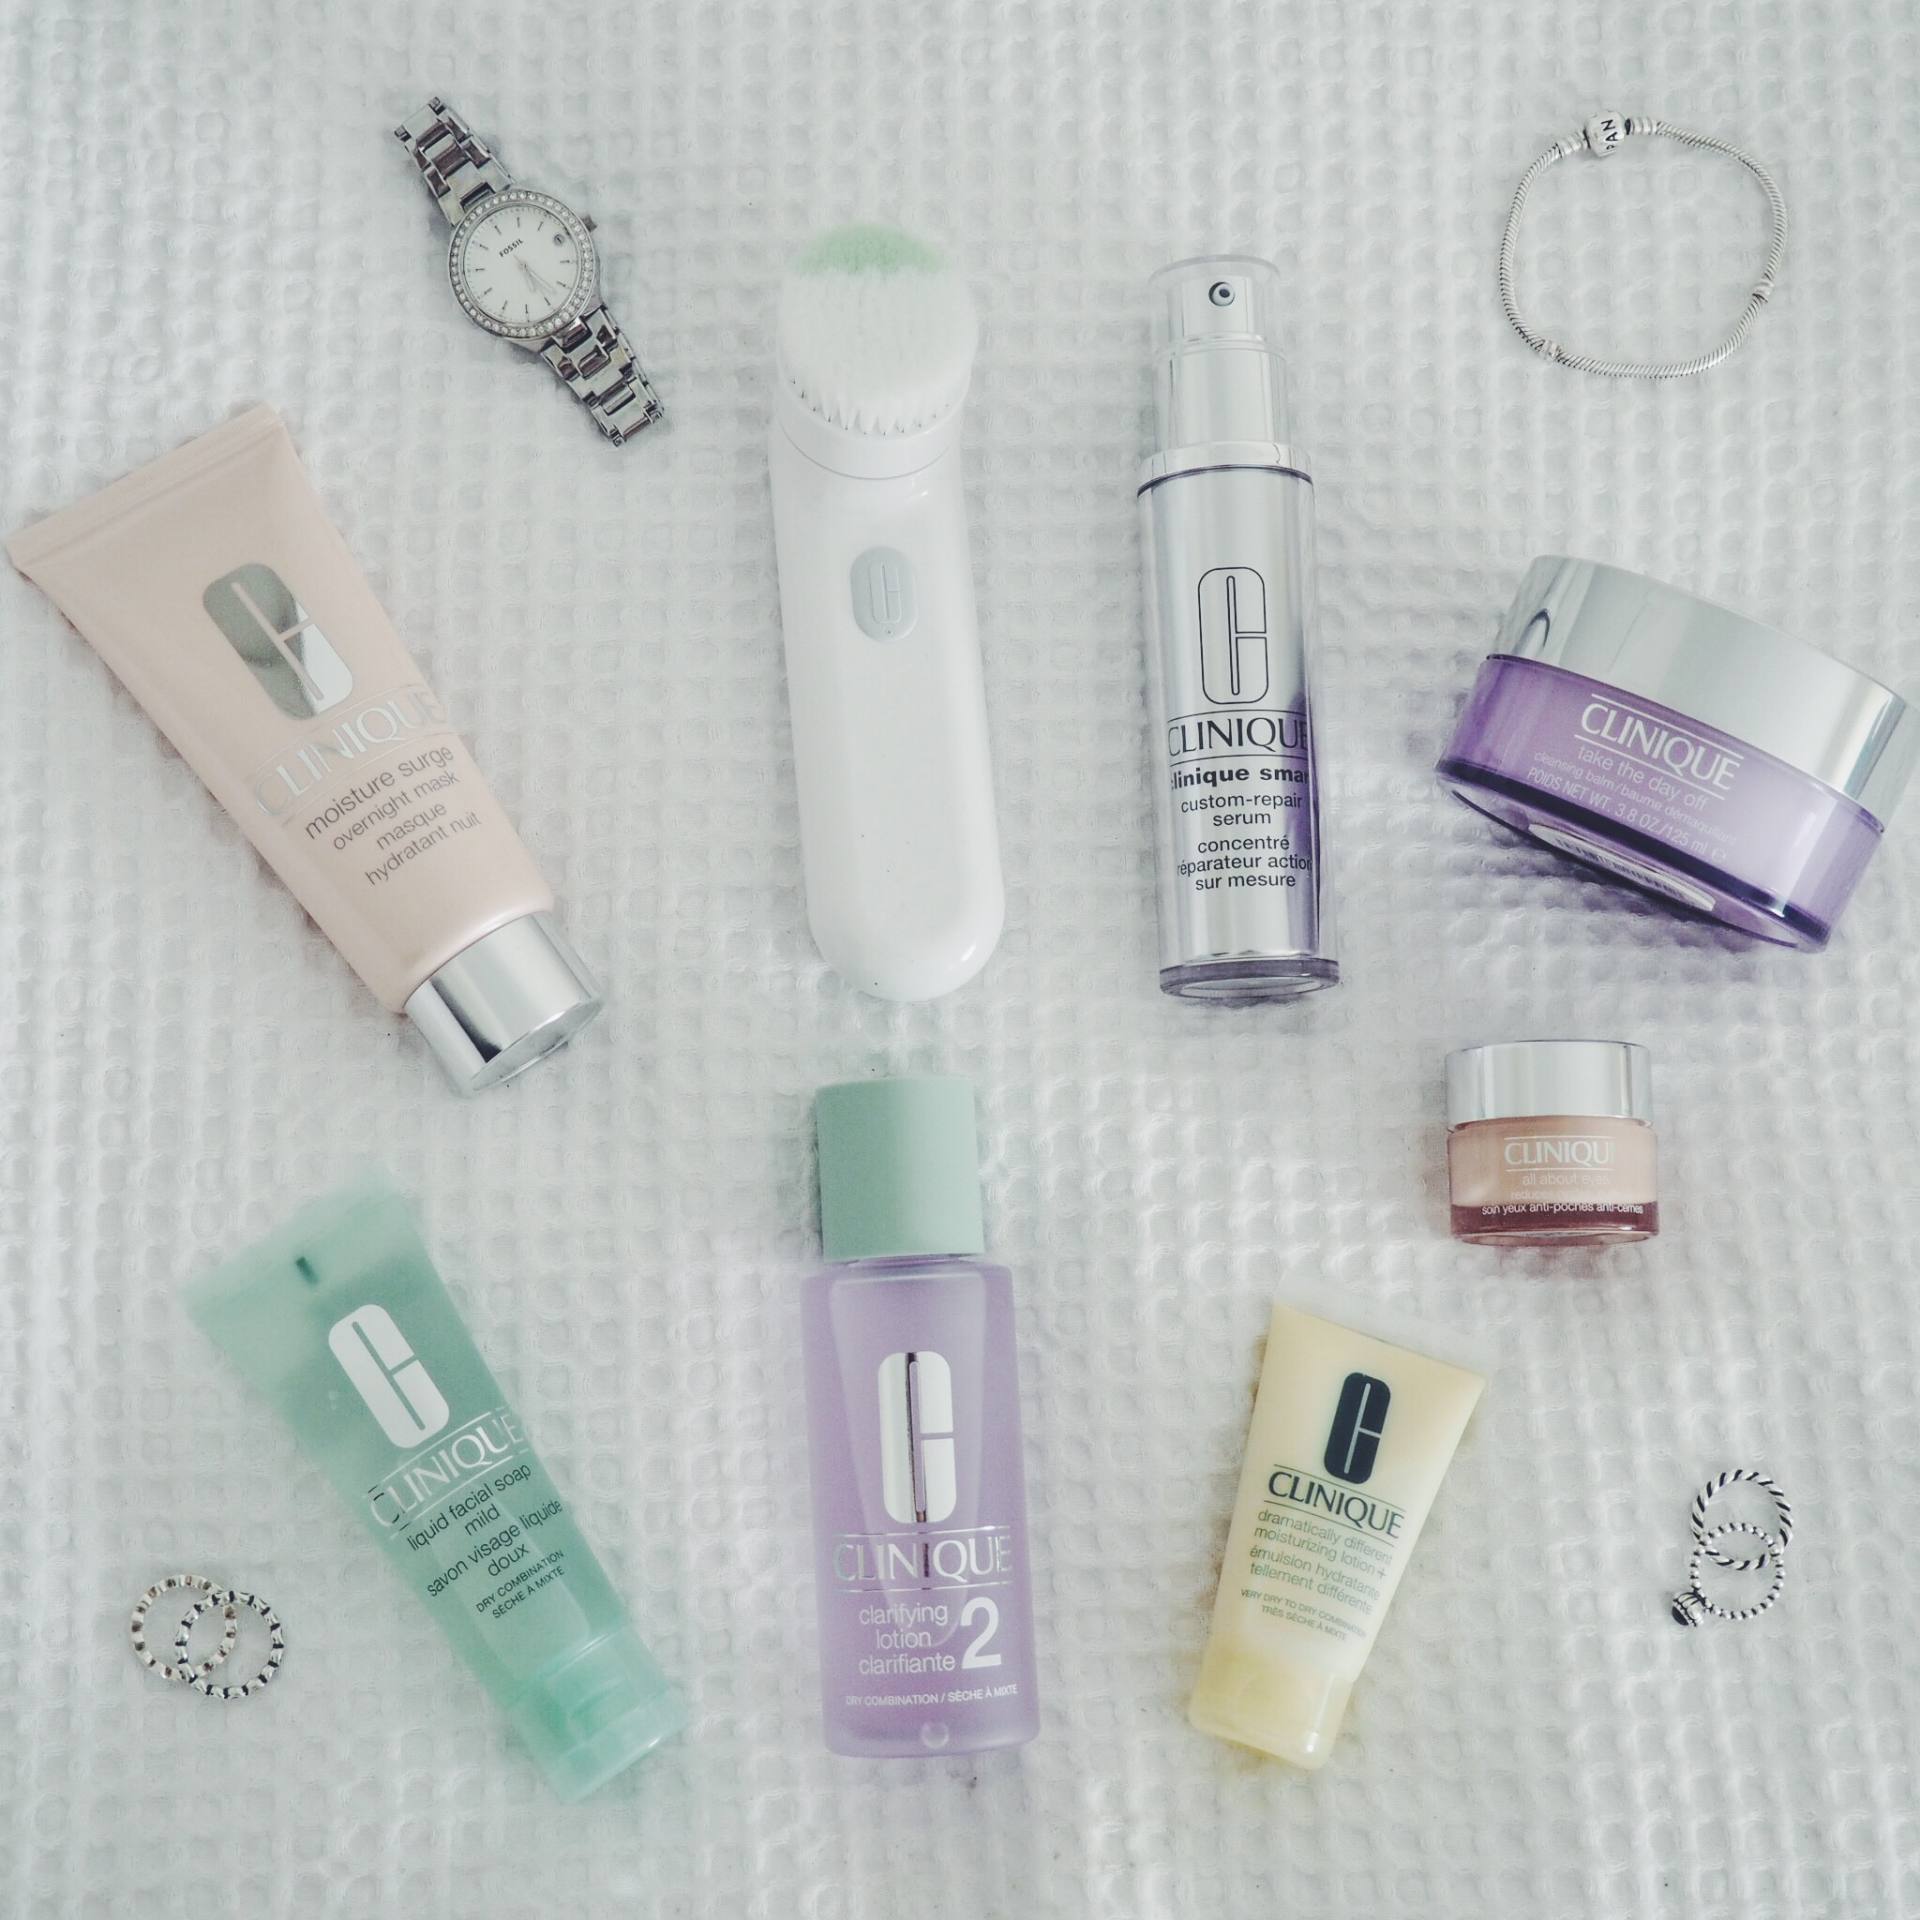 A picture of Clinique skincare products